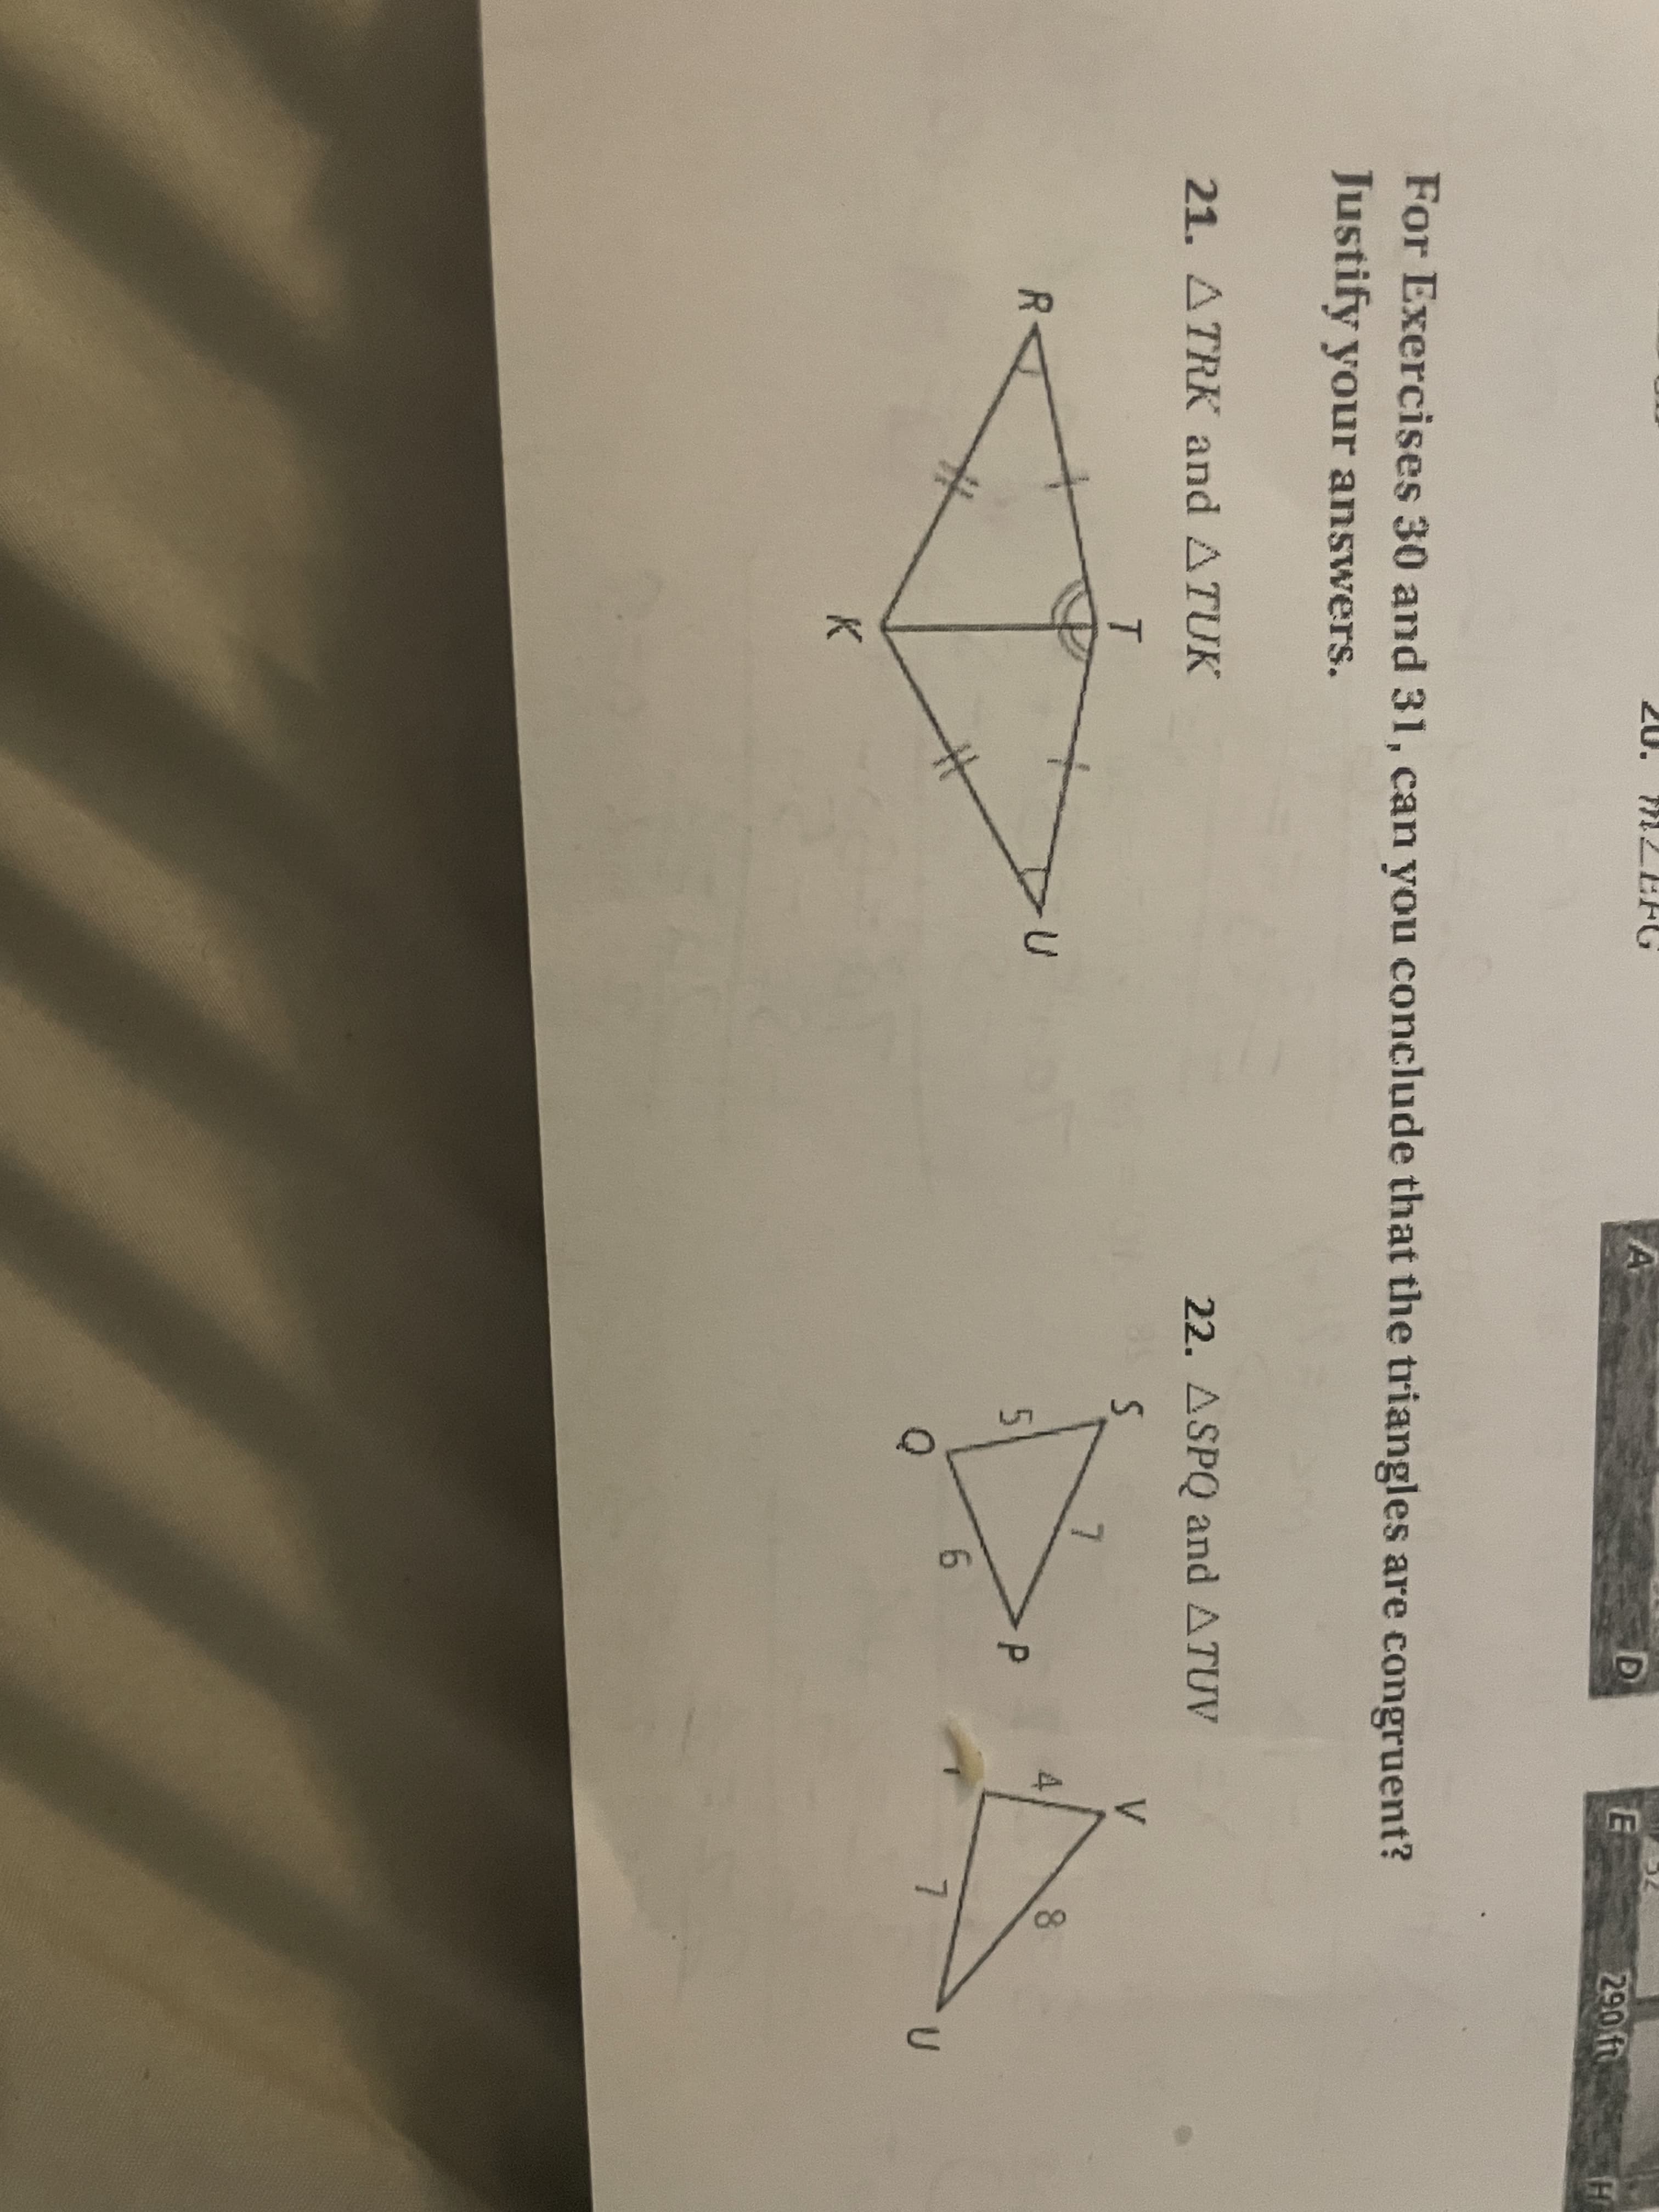 290 ft
For Exercises 30 and 31, can you conclude that the triangles are congruent?
Justify your answers.
22. ASPQ and ATUV
V.
21. ATRK and ATUK
T
8.
5
7.
%23
K.
